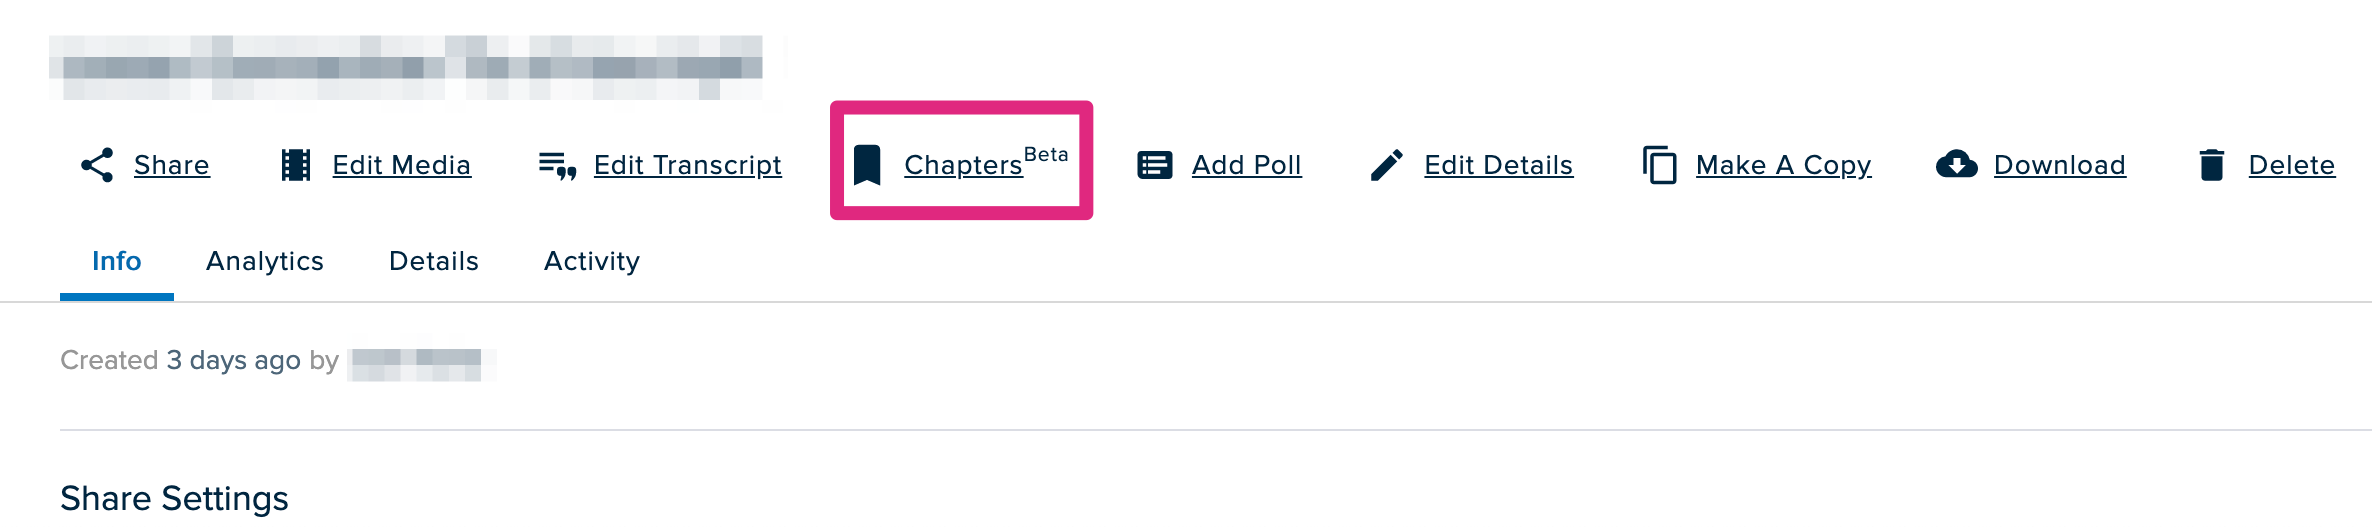 Video Details displyaed with Chapters identified in the action toolbar